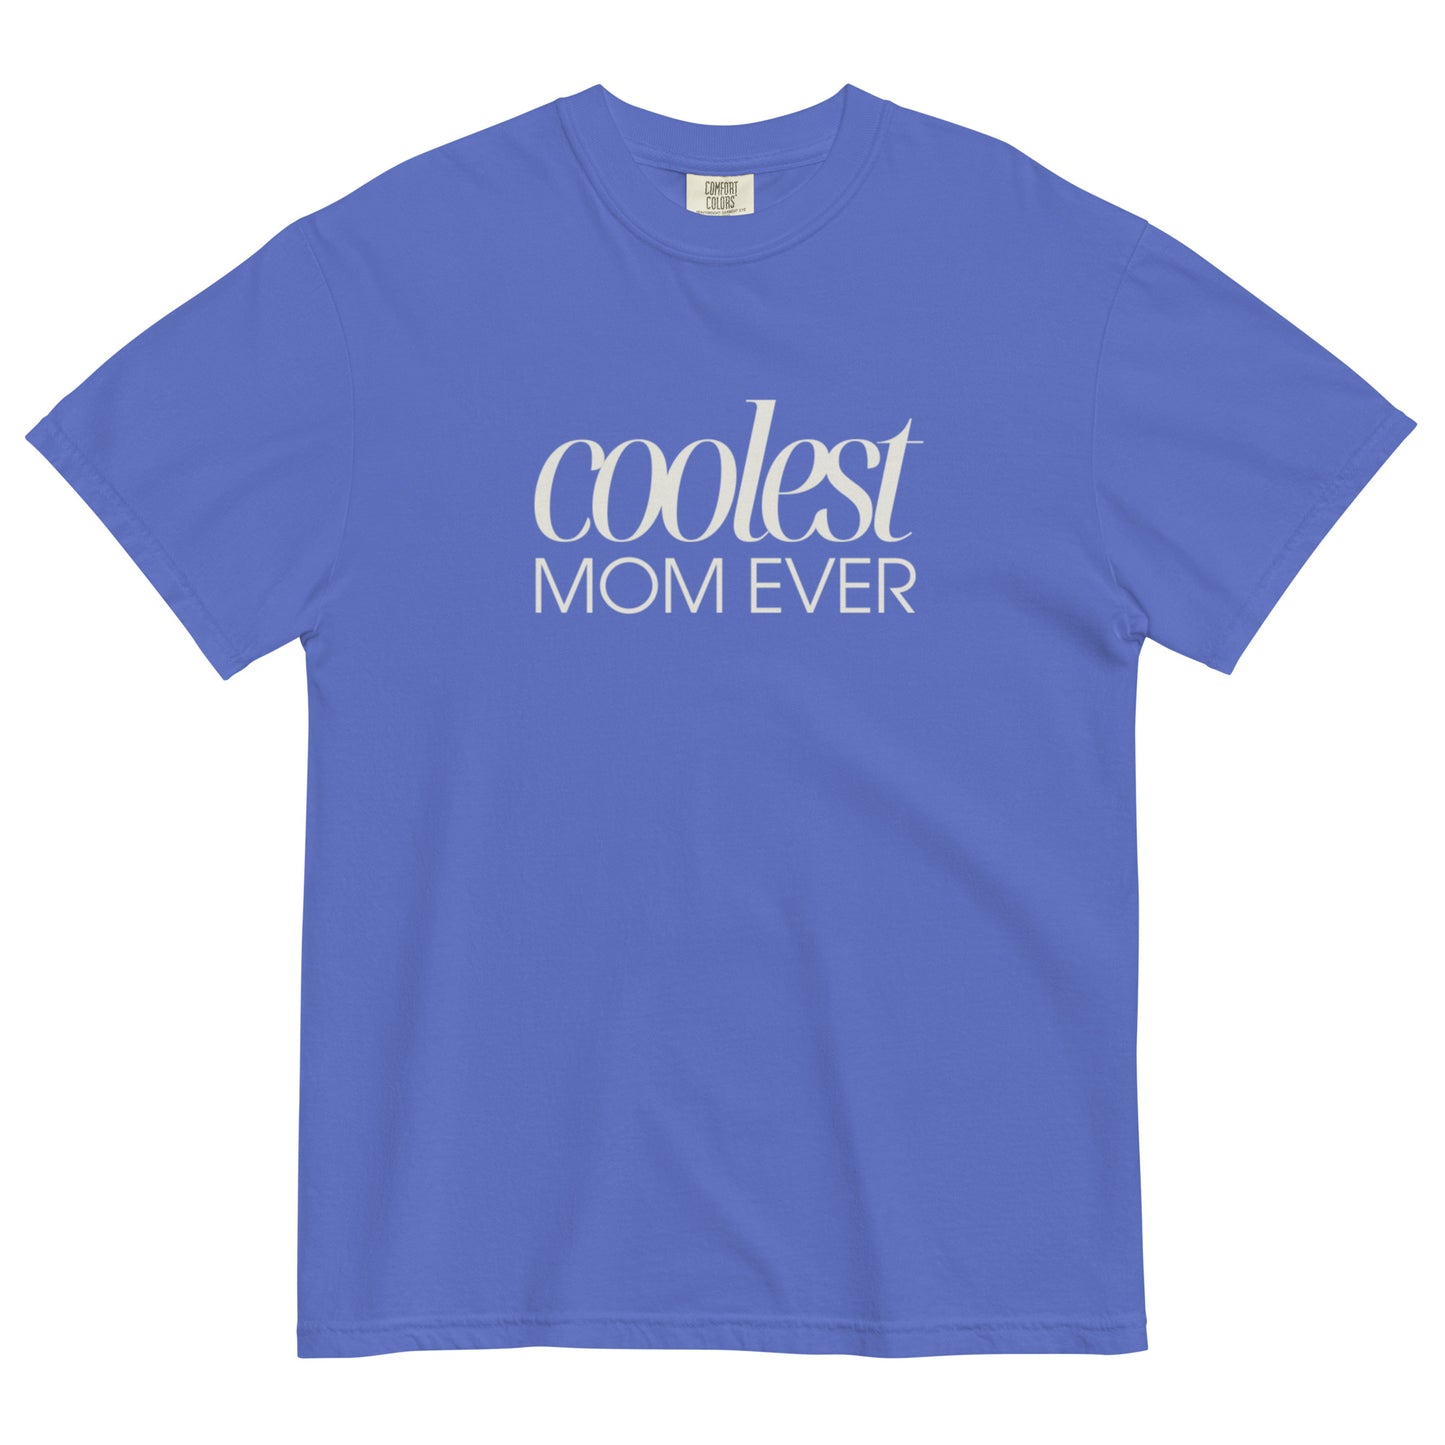 Women's The Coolest Mom Ever Graphic Tee